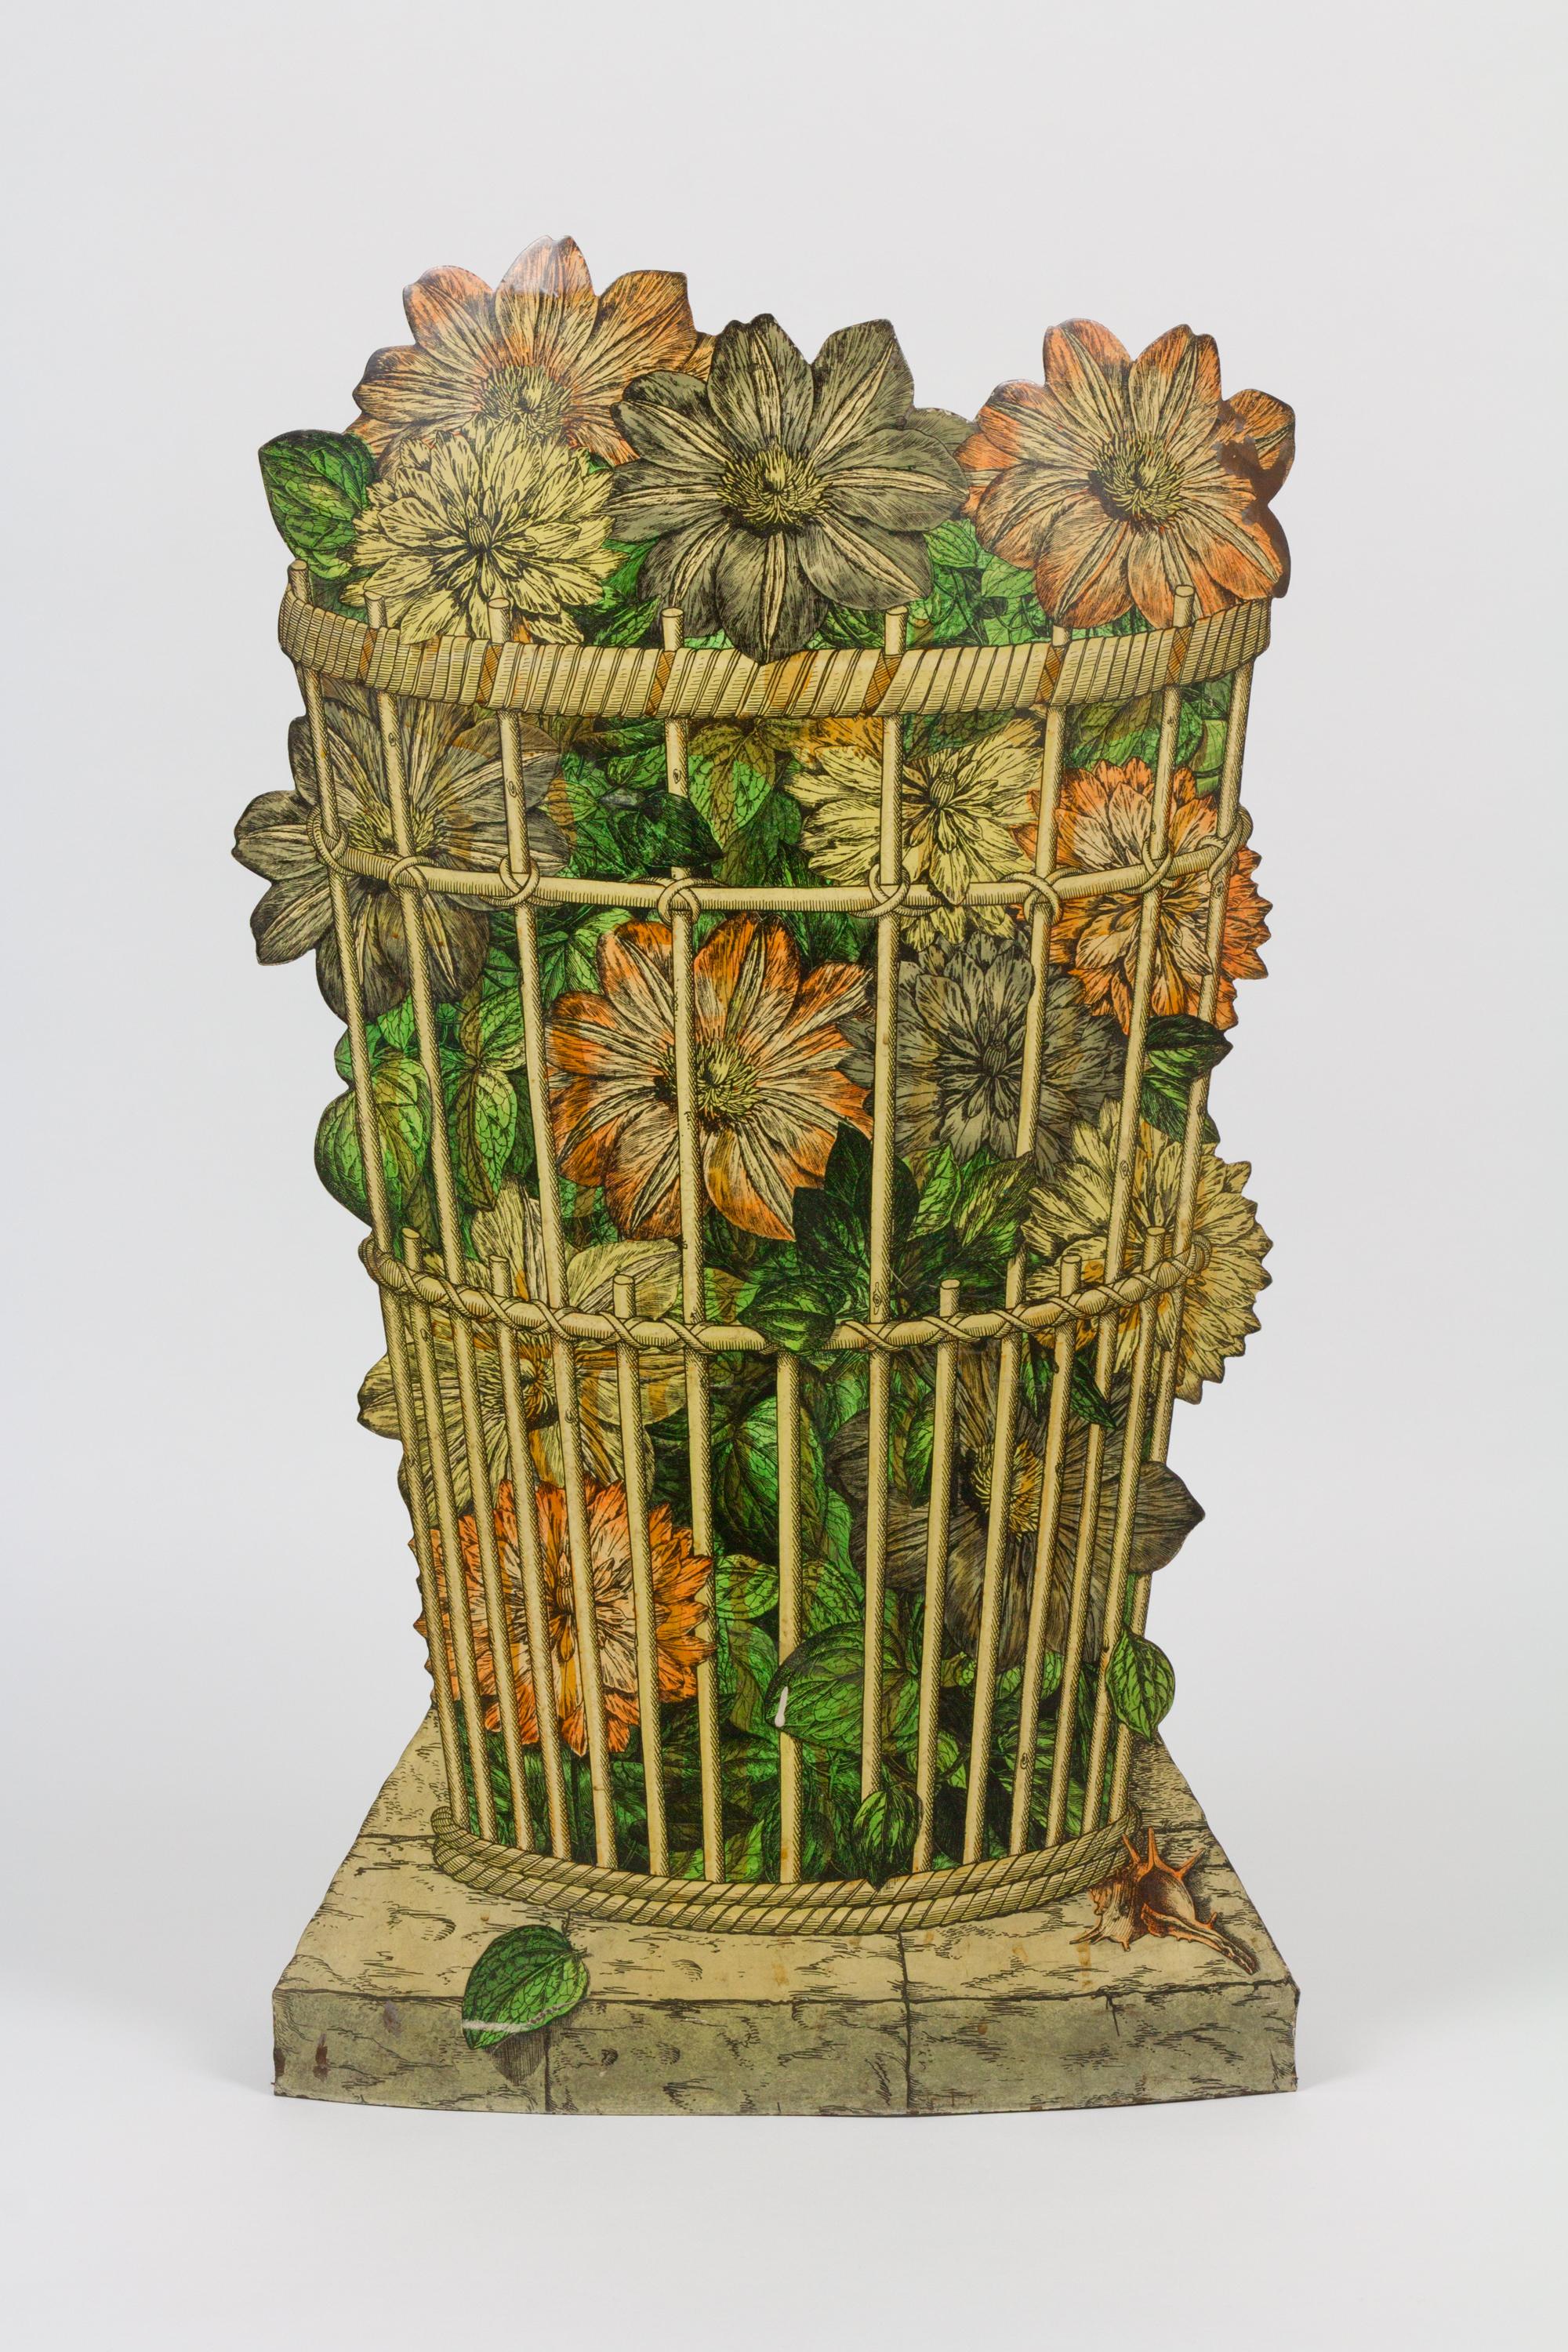 Umbrella stand depicting a basket of flowers in trompe l'oeil by Piero Fornasetti. Hand-painted and lithographic transfer-printed on steel. Retains removable tray and label.